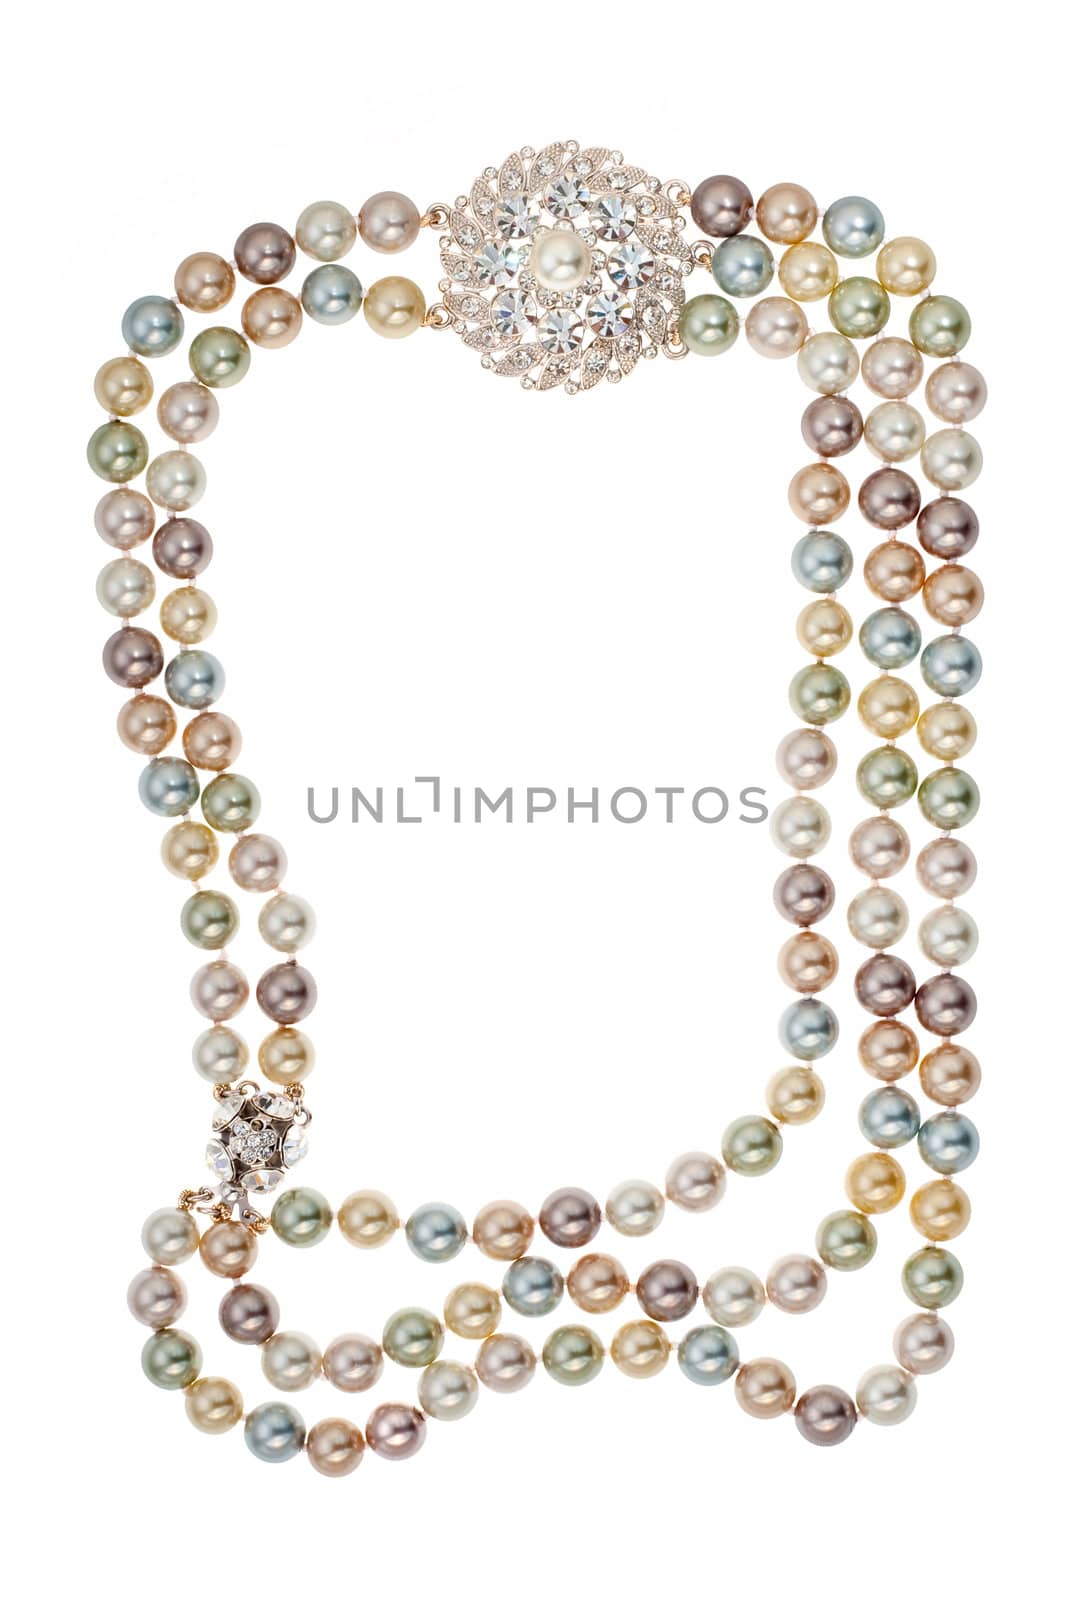 Frame of necklace with a brooch on white background